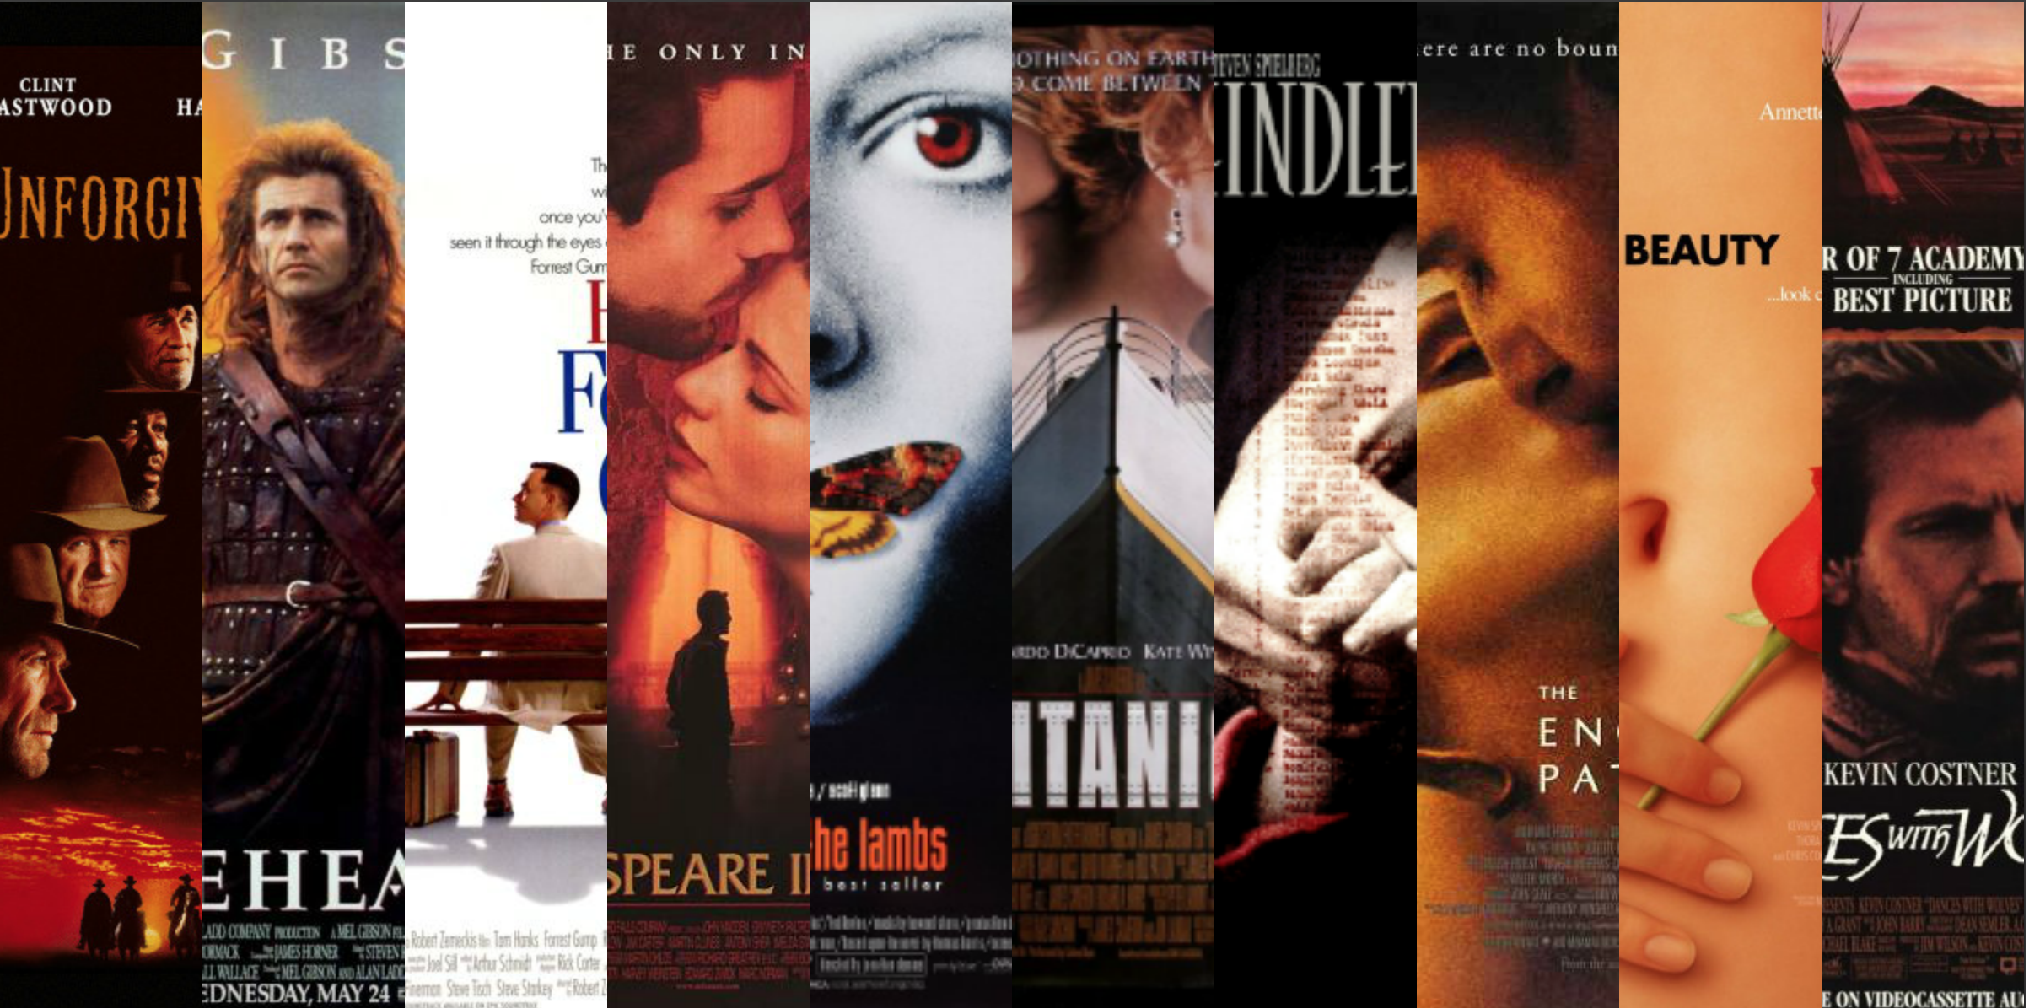 90s Award-Winning movies that you shouldn’t miss watching